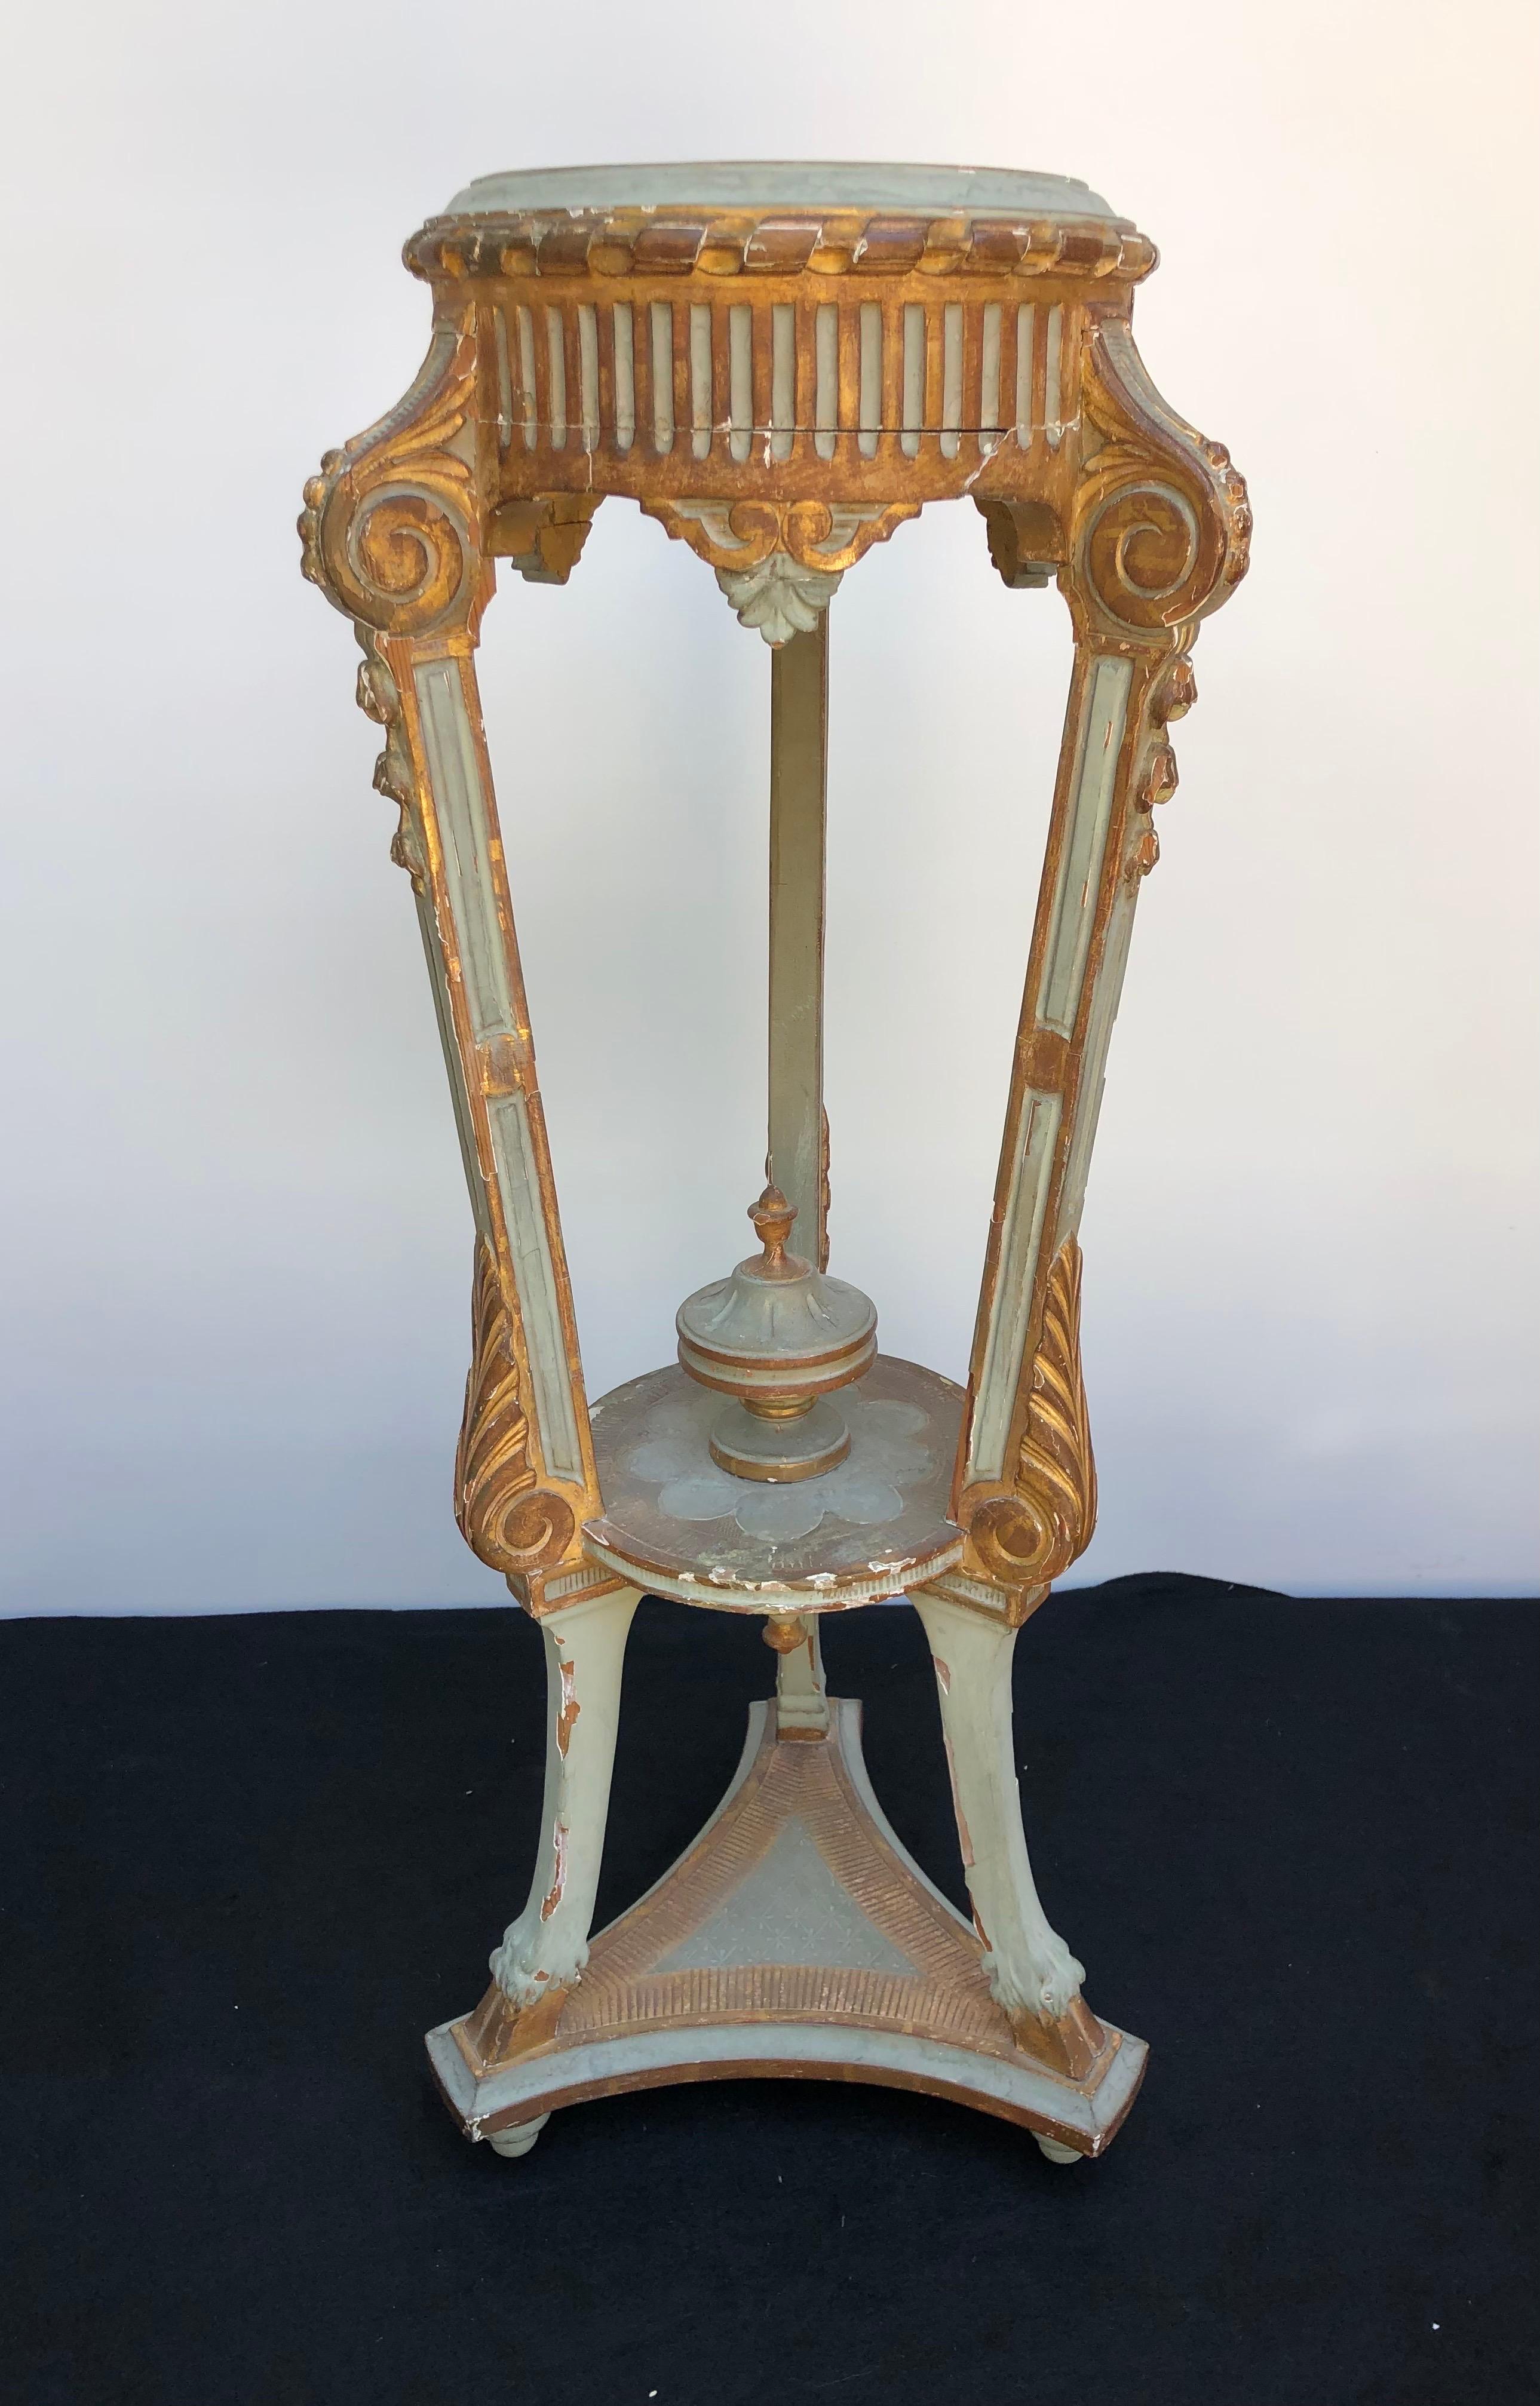 Wood Pair Neoclassical Italian Painted Parcel-Gilt Torchieres / Pedestals, 18th C.